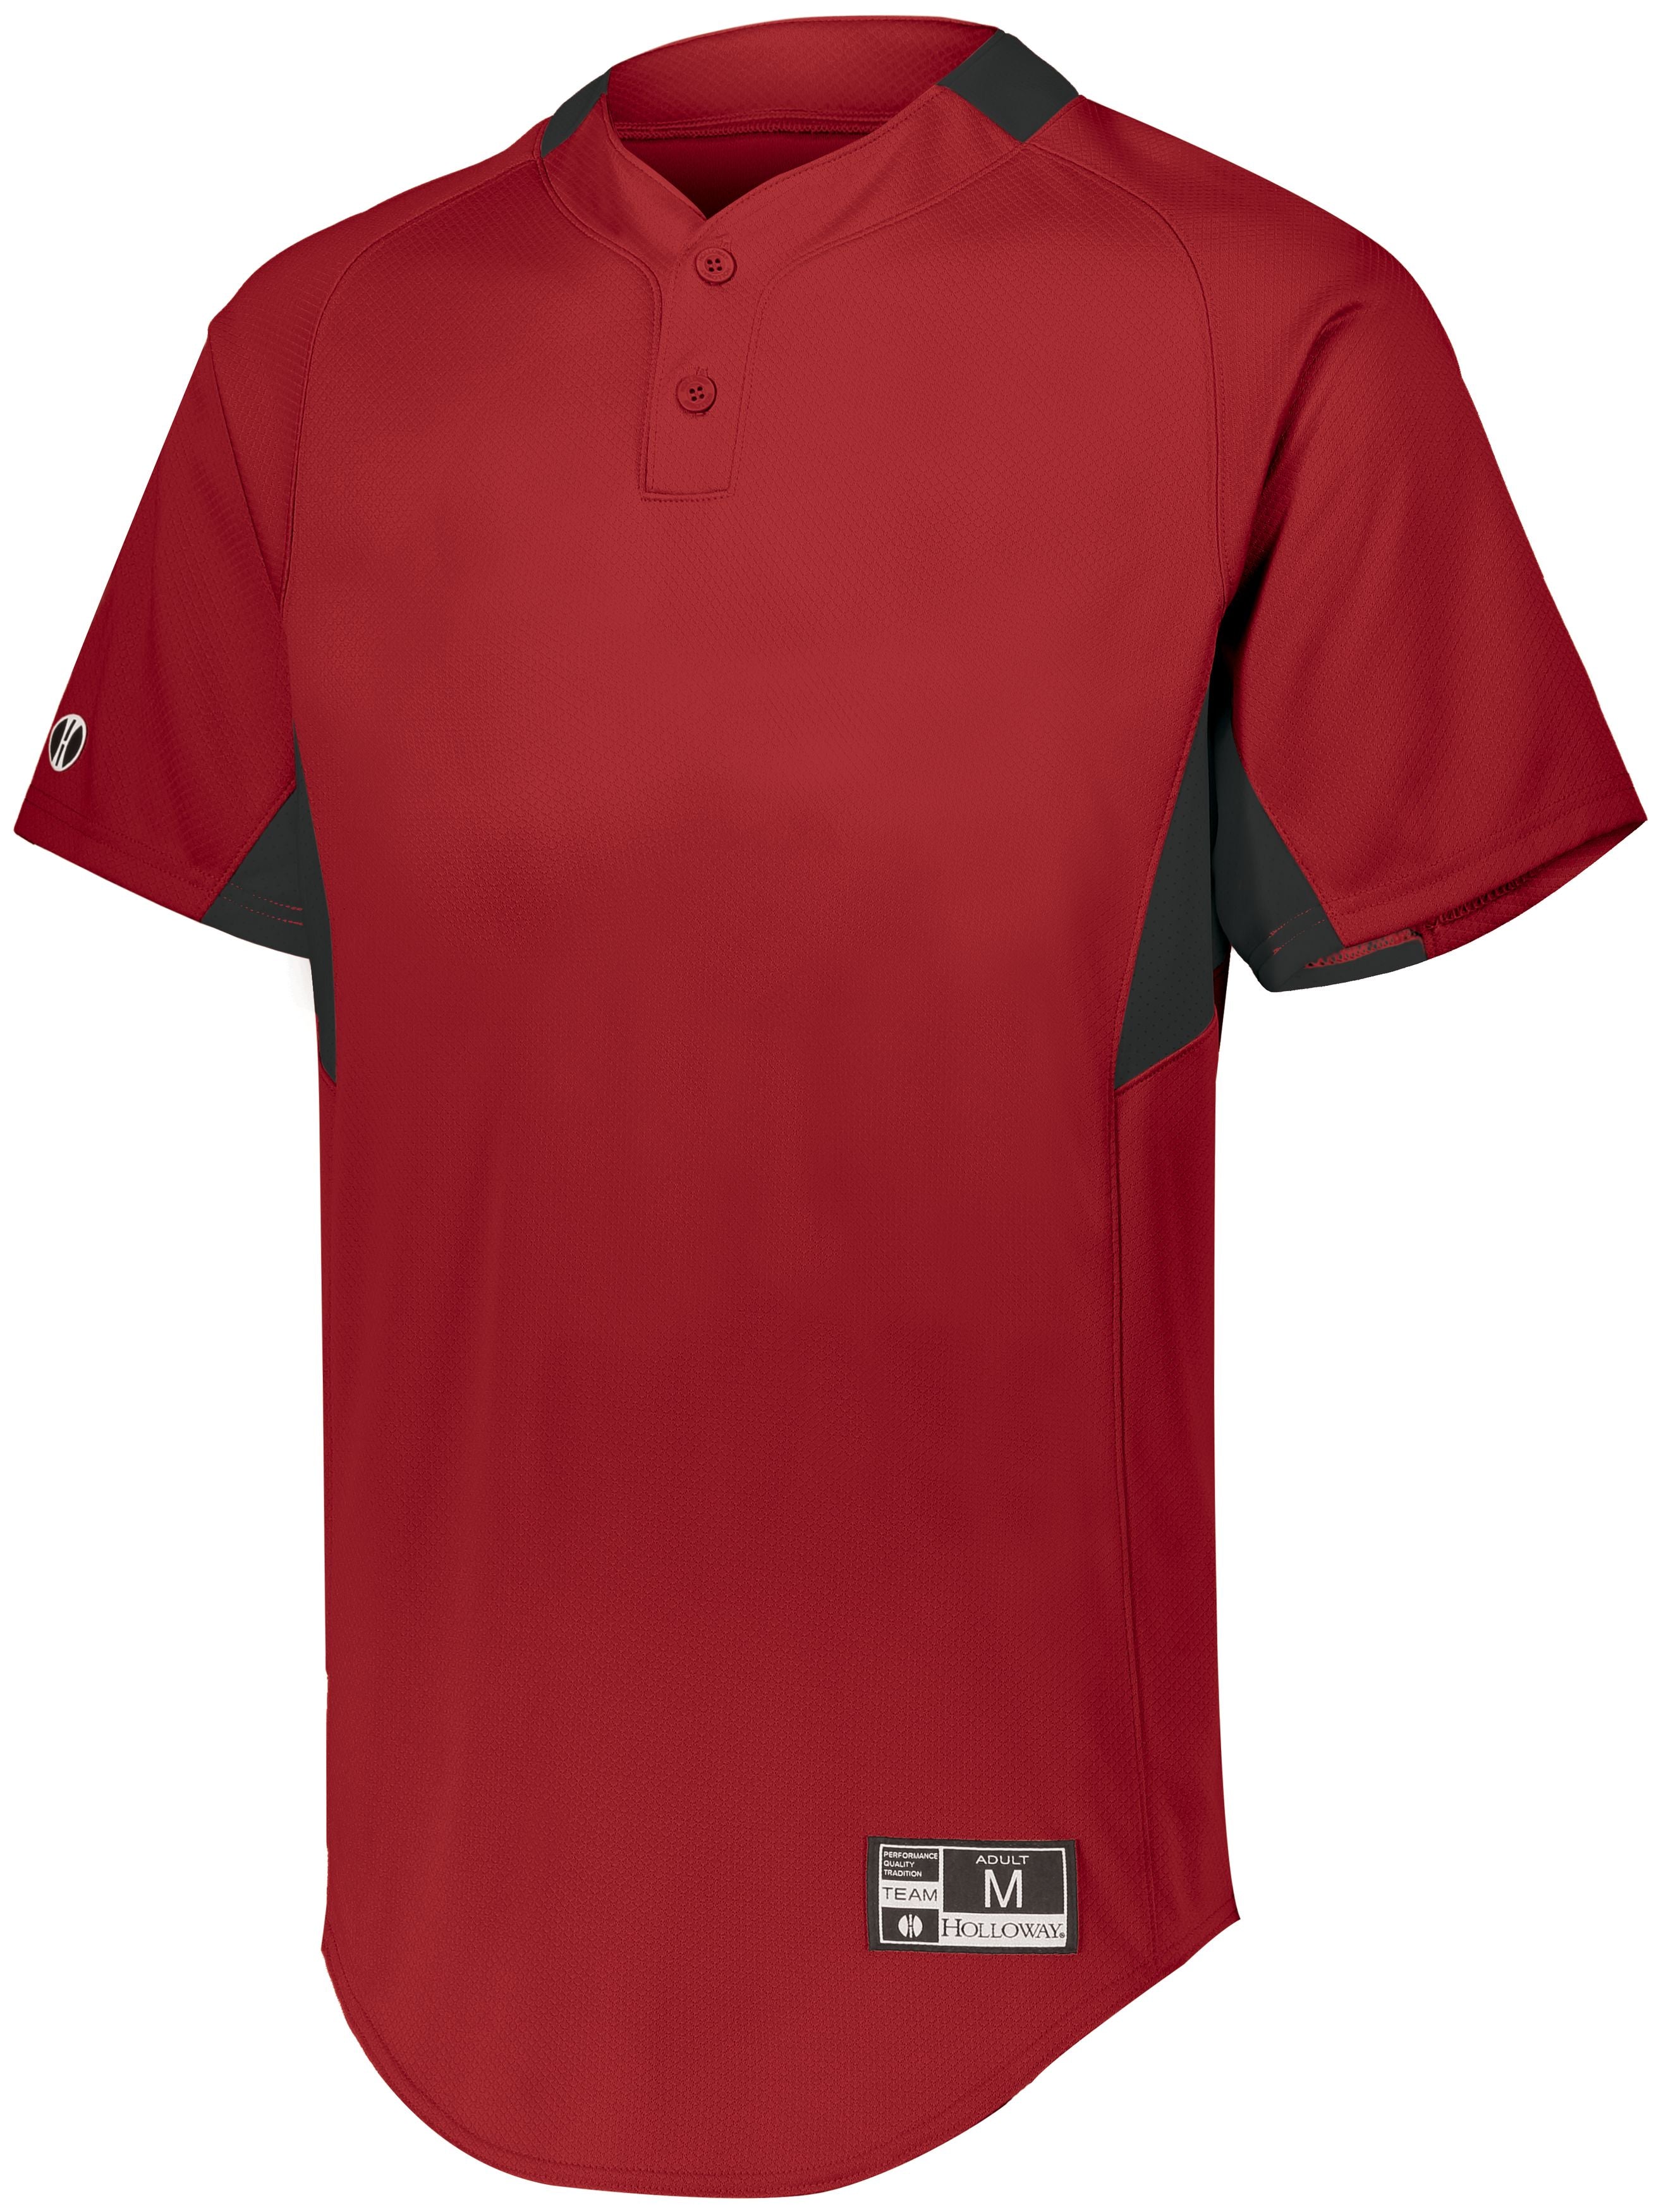 Holloway Youth  Game7 Two-Button Baseball Jersey in Scarlet/Black  -Part of the Youth, Youth-Jersey, Baseball, Holloway, Shirts, All-Sports, All-Sports-1 product lines at KanaleyCreations.com